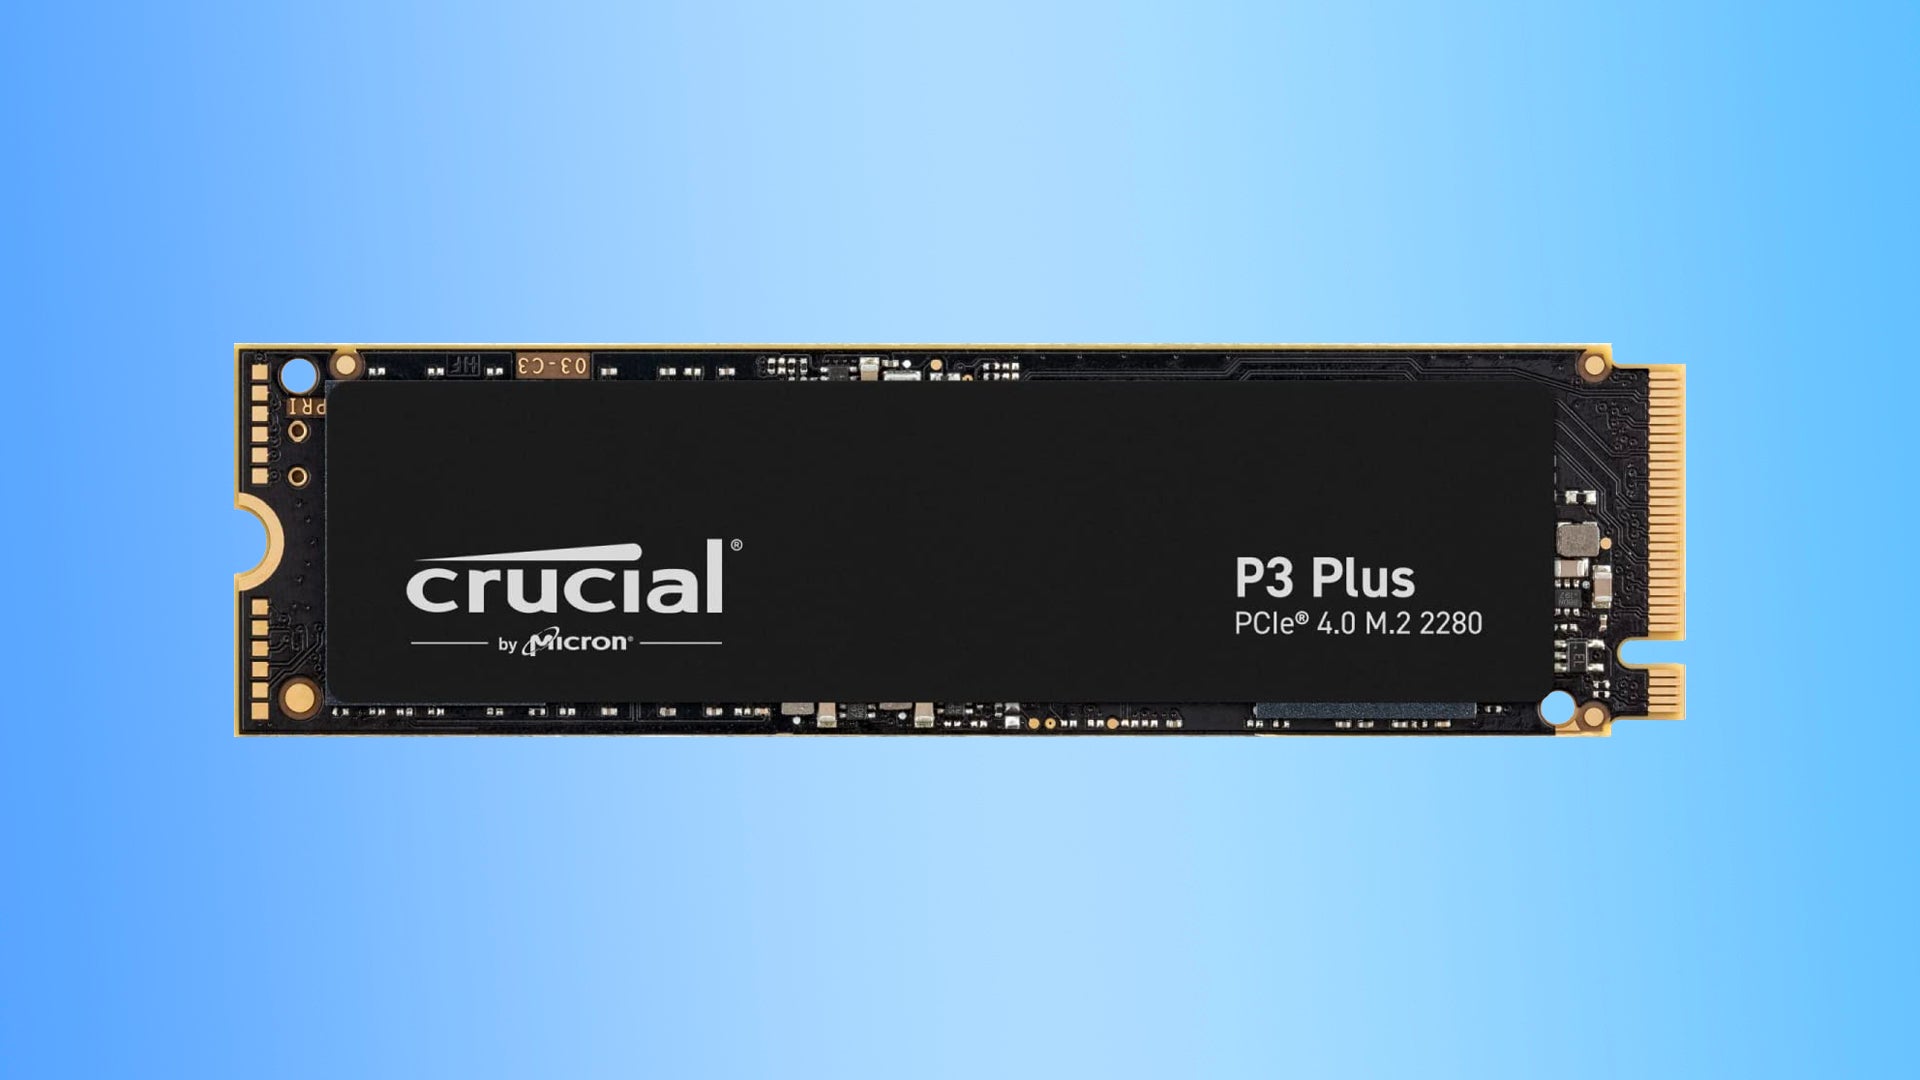 This Crucial P3 Plus 4TB NVMe SSD for £263 is an absolute steal